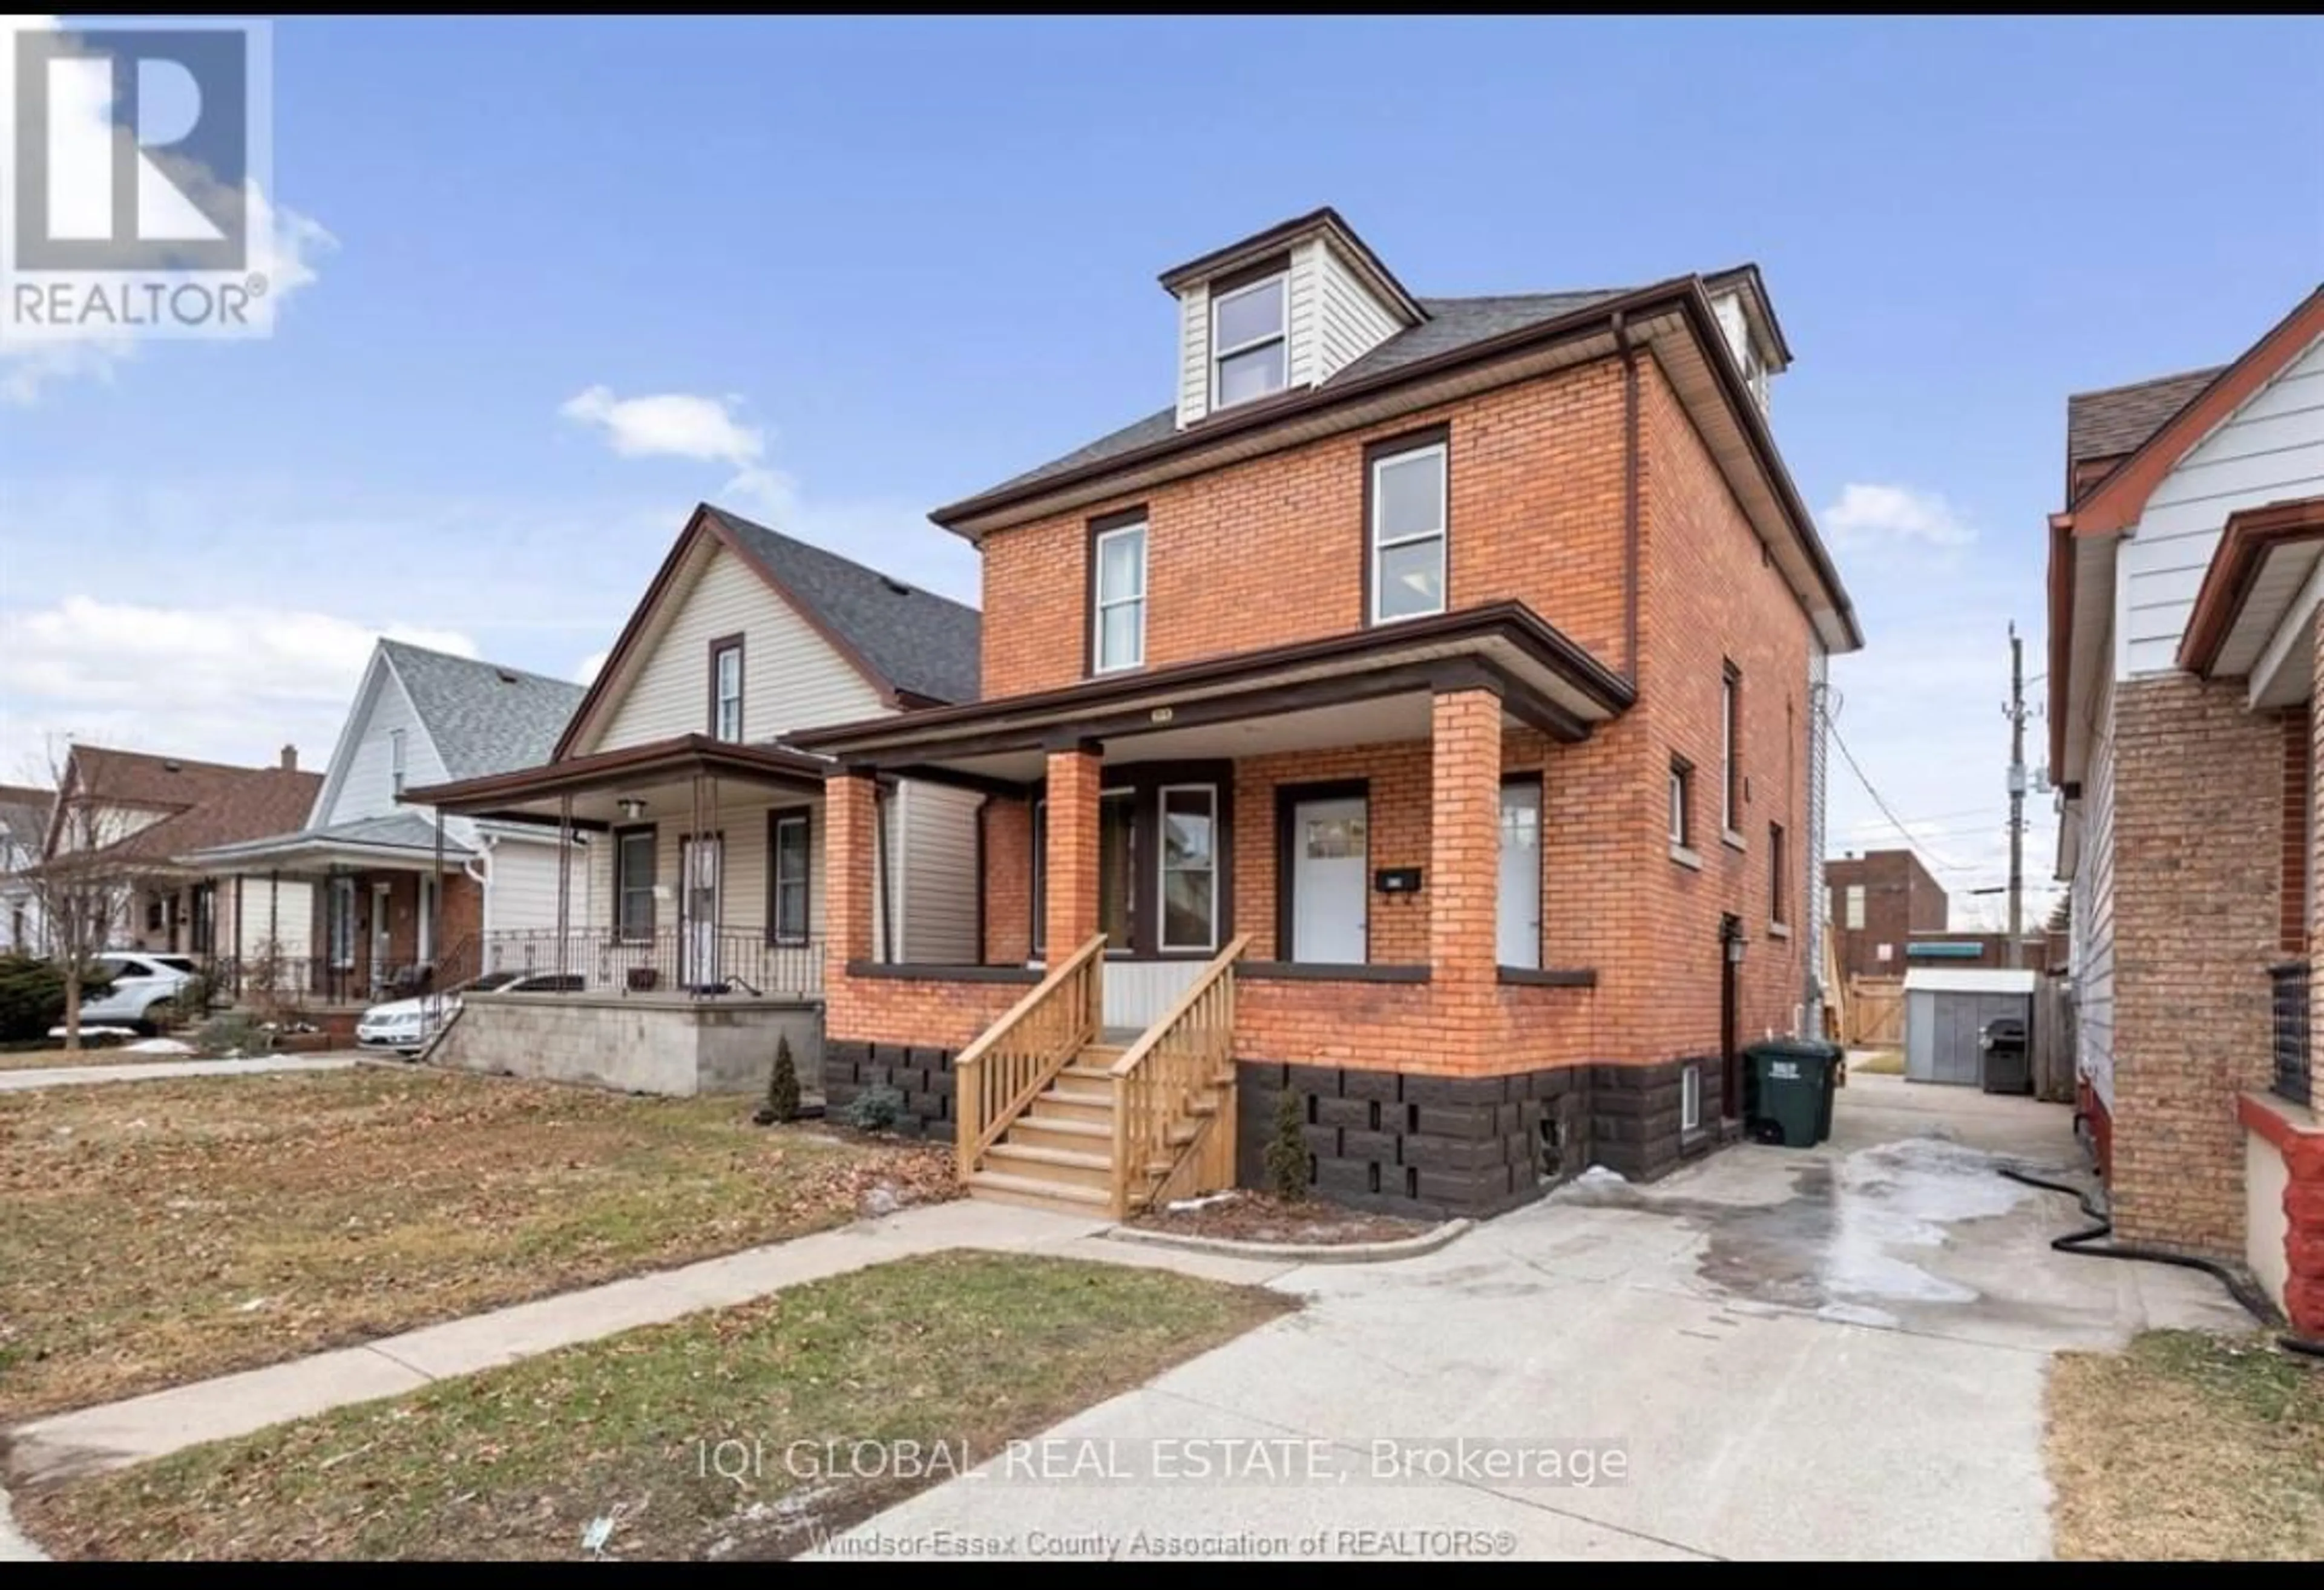 Home with brick exterior material for 919 Pierre Ave, Windsor Ontario N9A 0X8